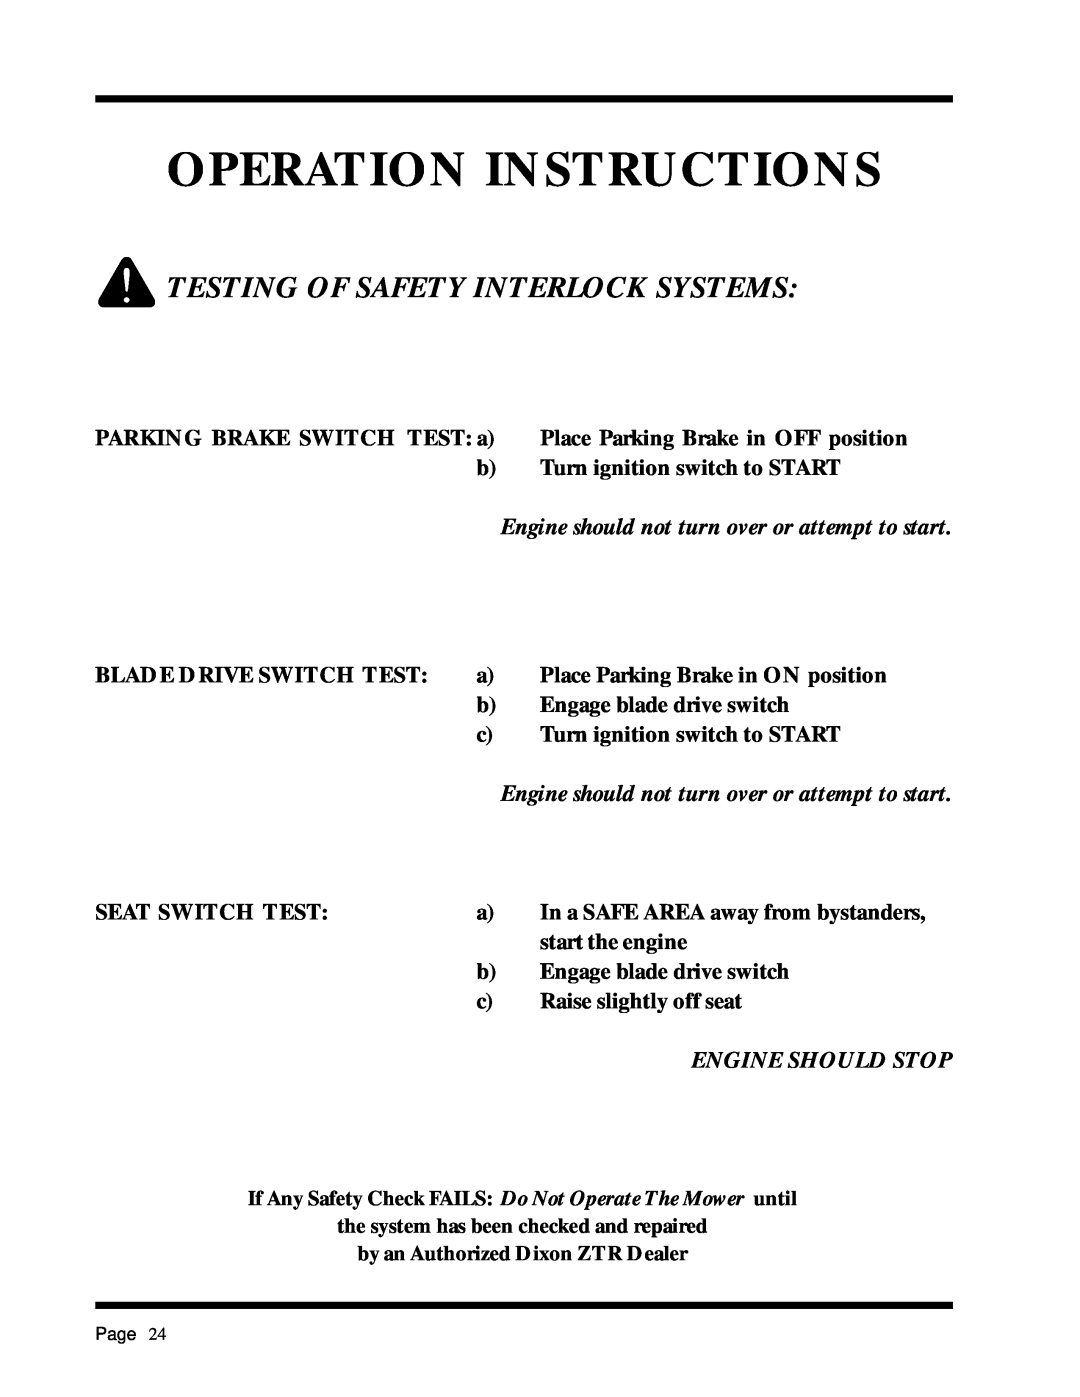 Dixon ZTR 3303, ZTR 3304, 1855-0599, 6520-1099 manual Testing Of Safety Interlock Systems, Operation Instructions 